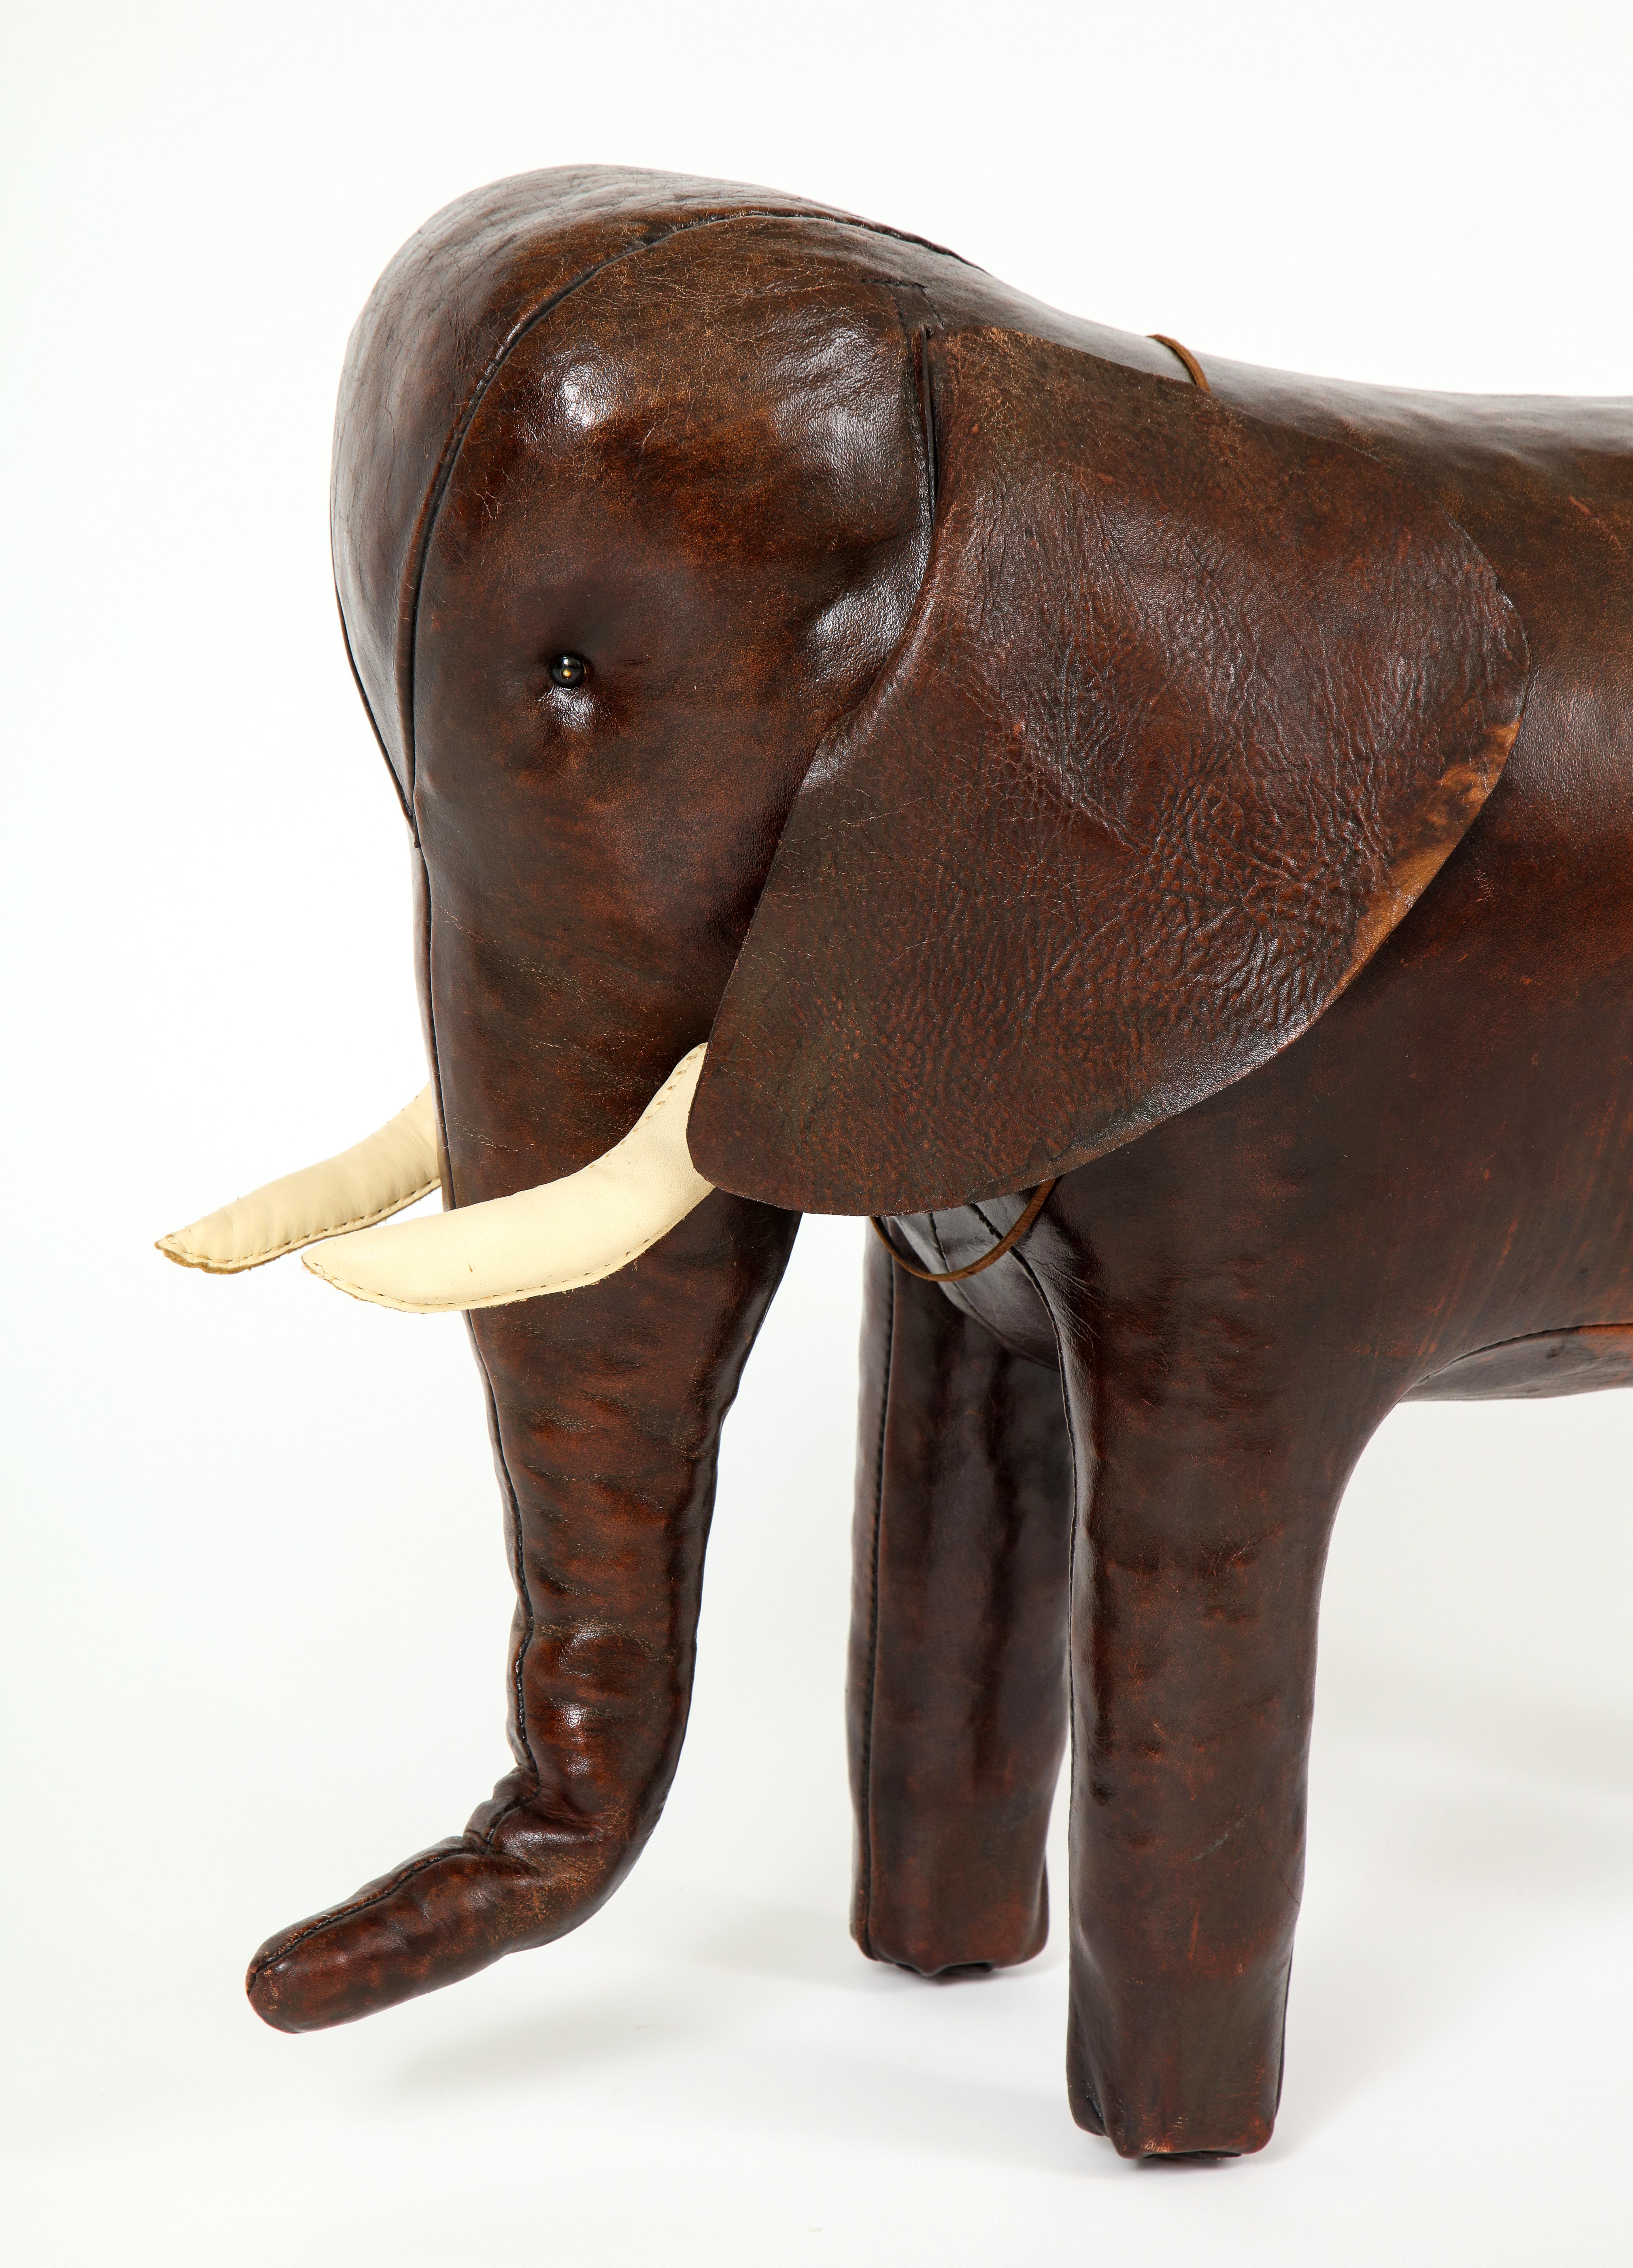 Fun and whimsical is this large leather elephant designed by Dimitri Omersa for Abercrombie & Fitch. Beautiful condition with some striation on one side of his body which gives him character and personality. Acquired from a family's personal